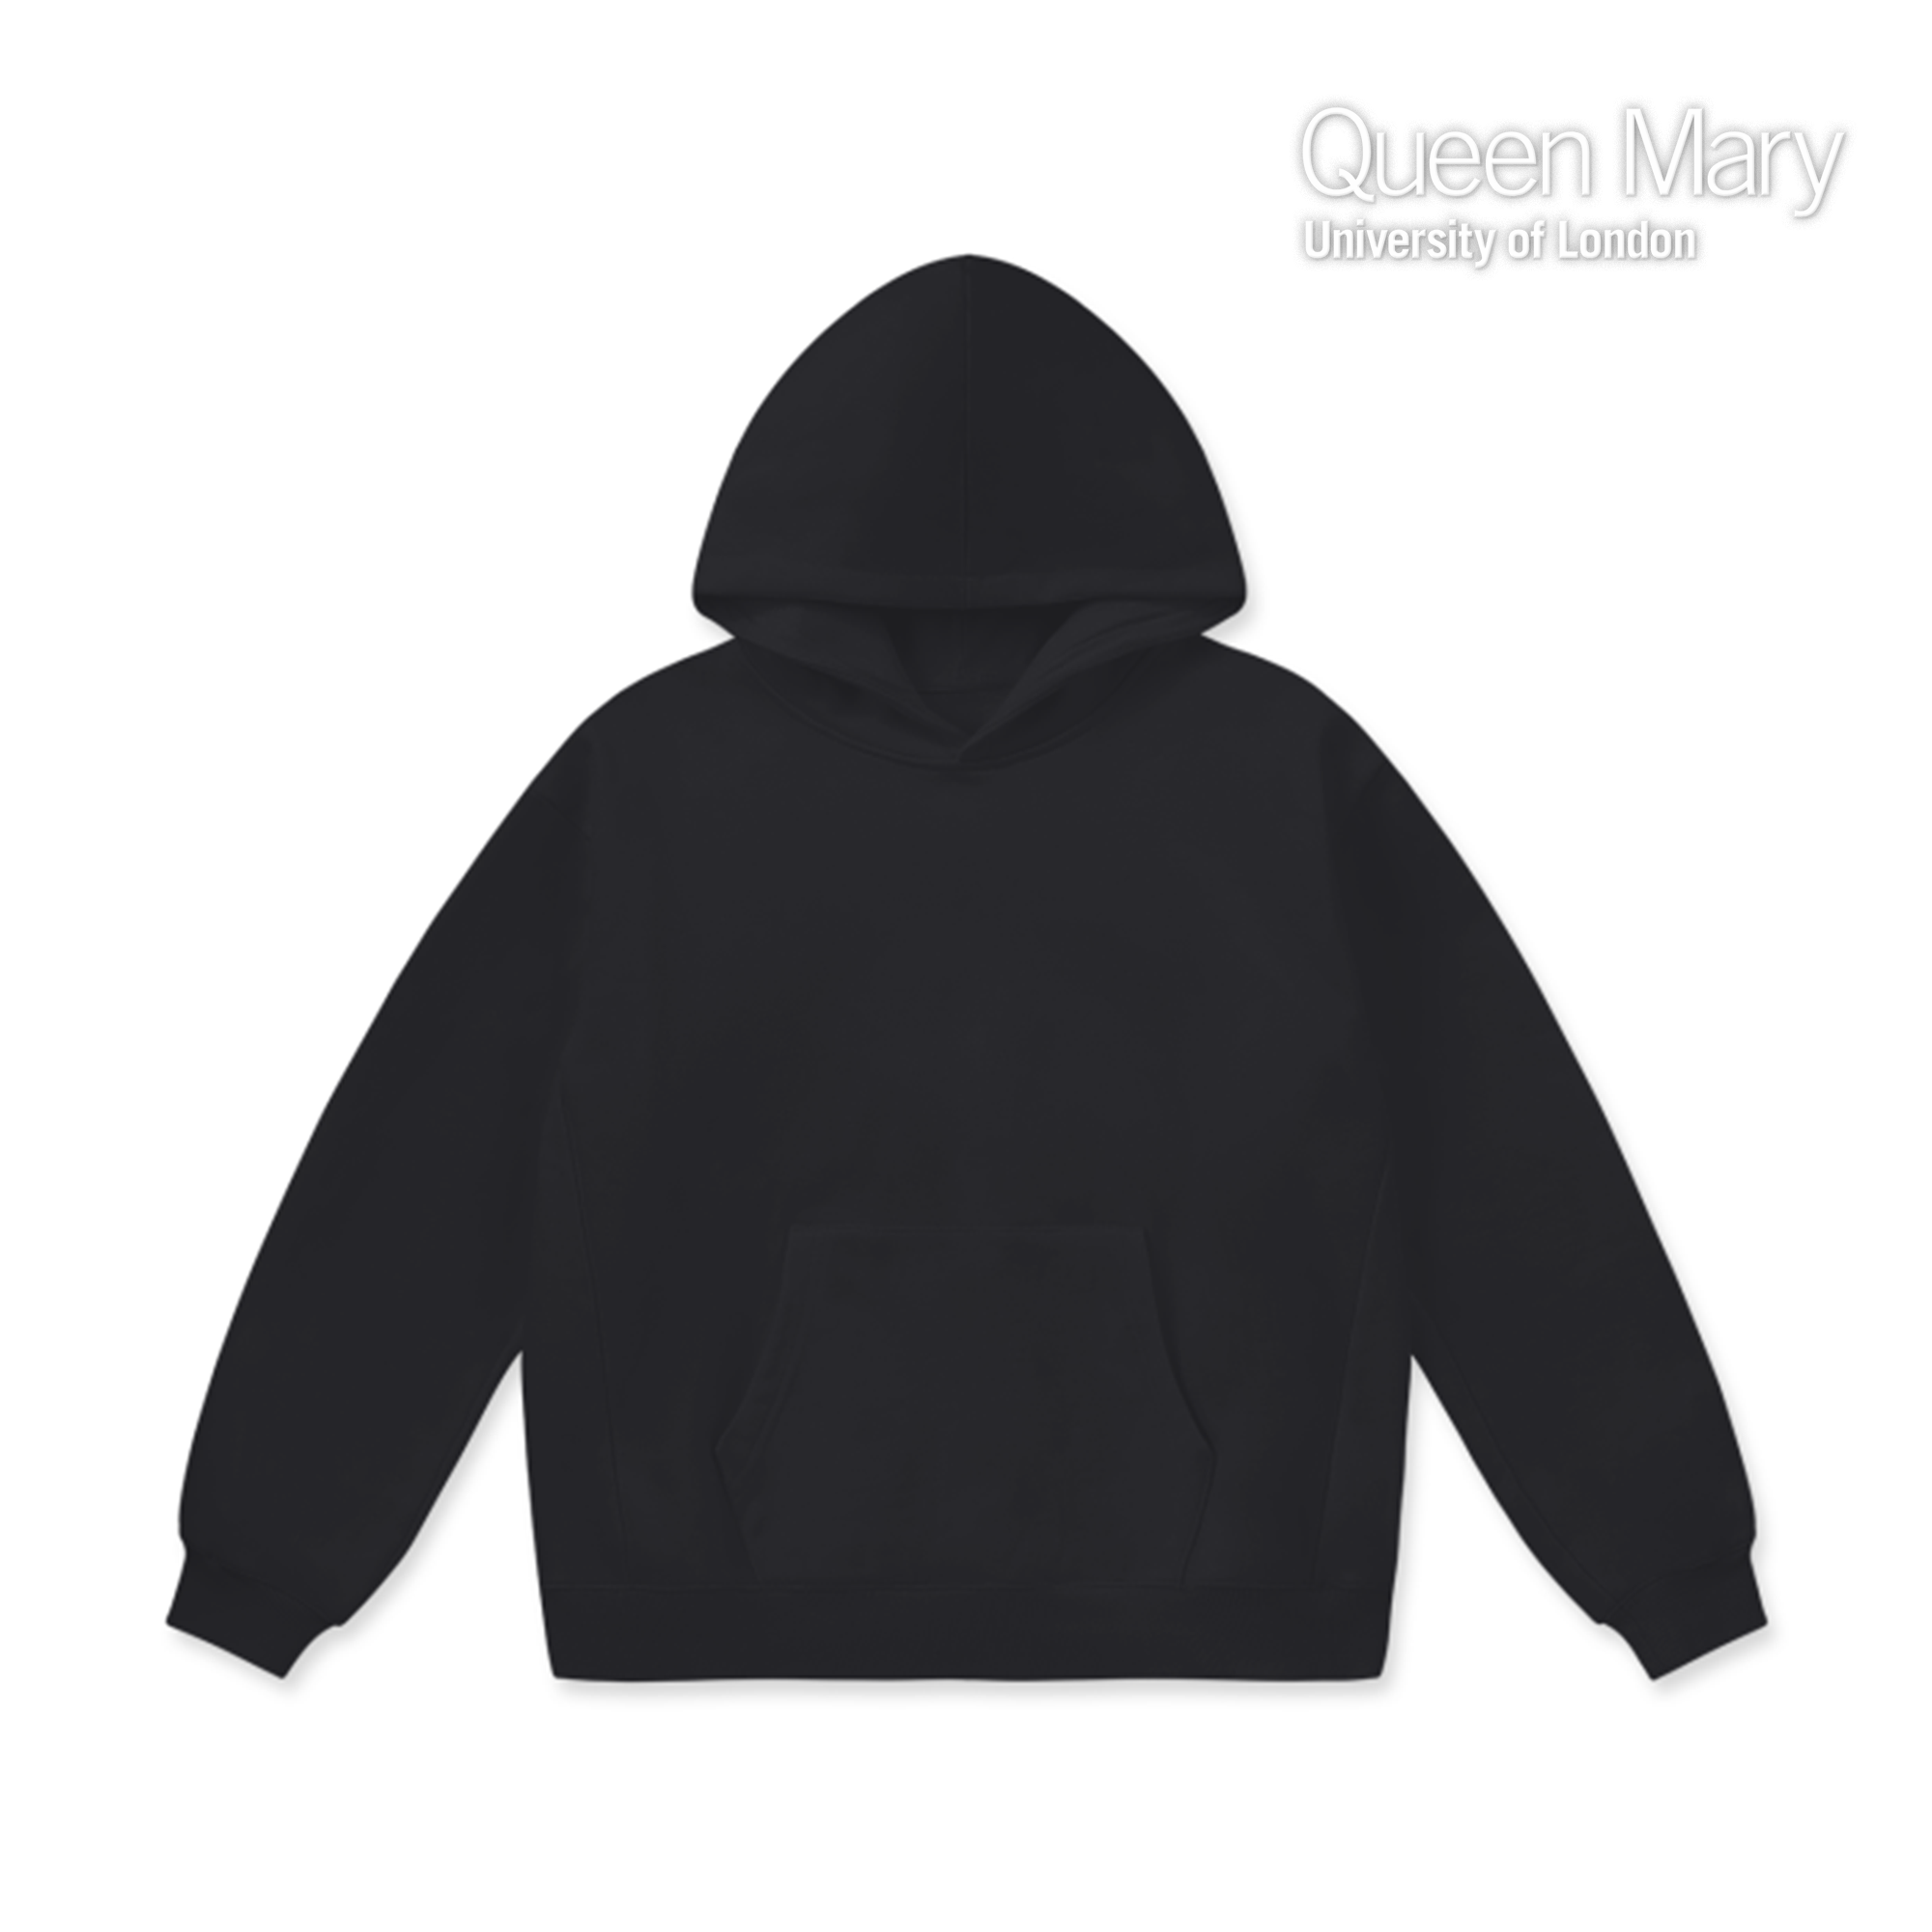 LCC Super Weighted Hoodie - Queen Mary University of London (Modern Ver.2)